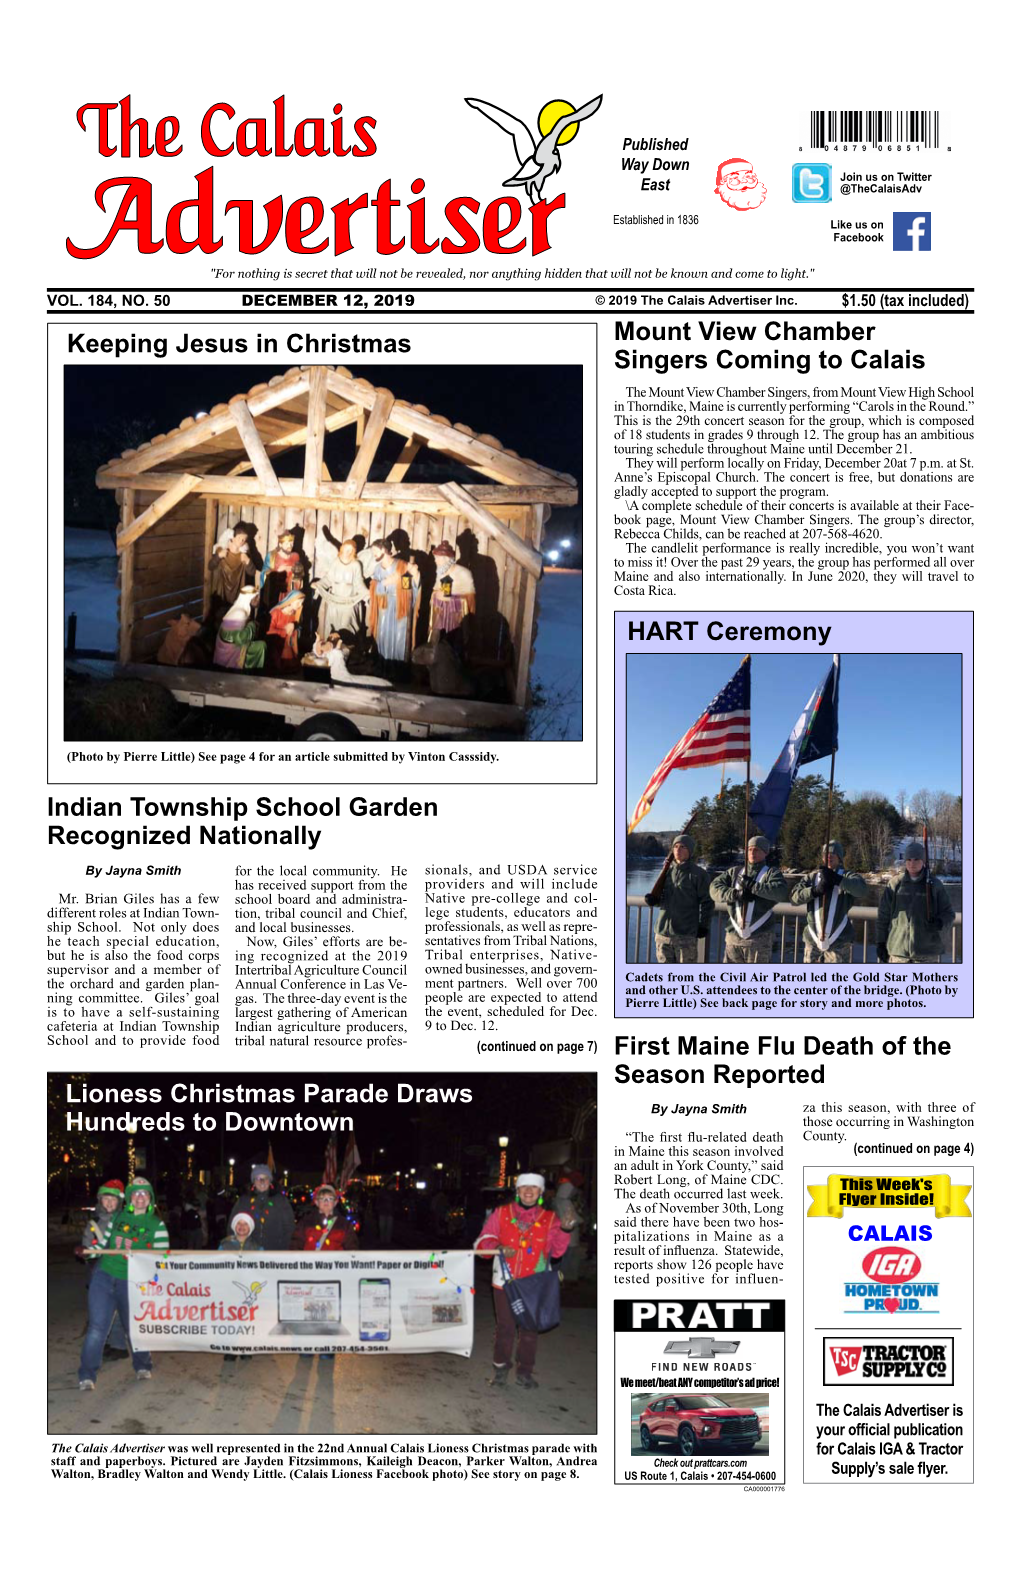 HART Ceremony Lioness Christmas Parade Draws Hundreds to Downtown First Maine Flu Death of the Season Reported Mount View Chambe